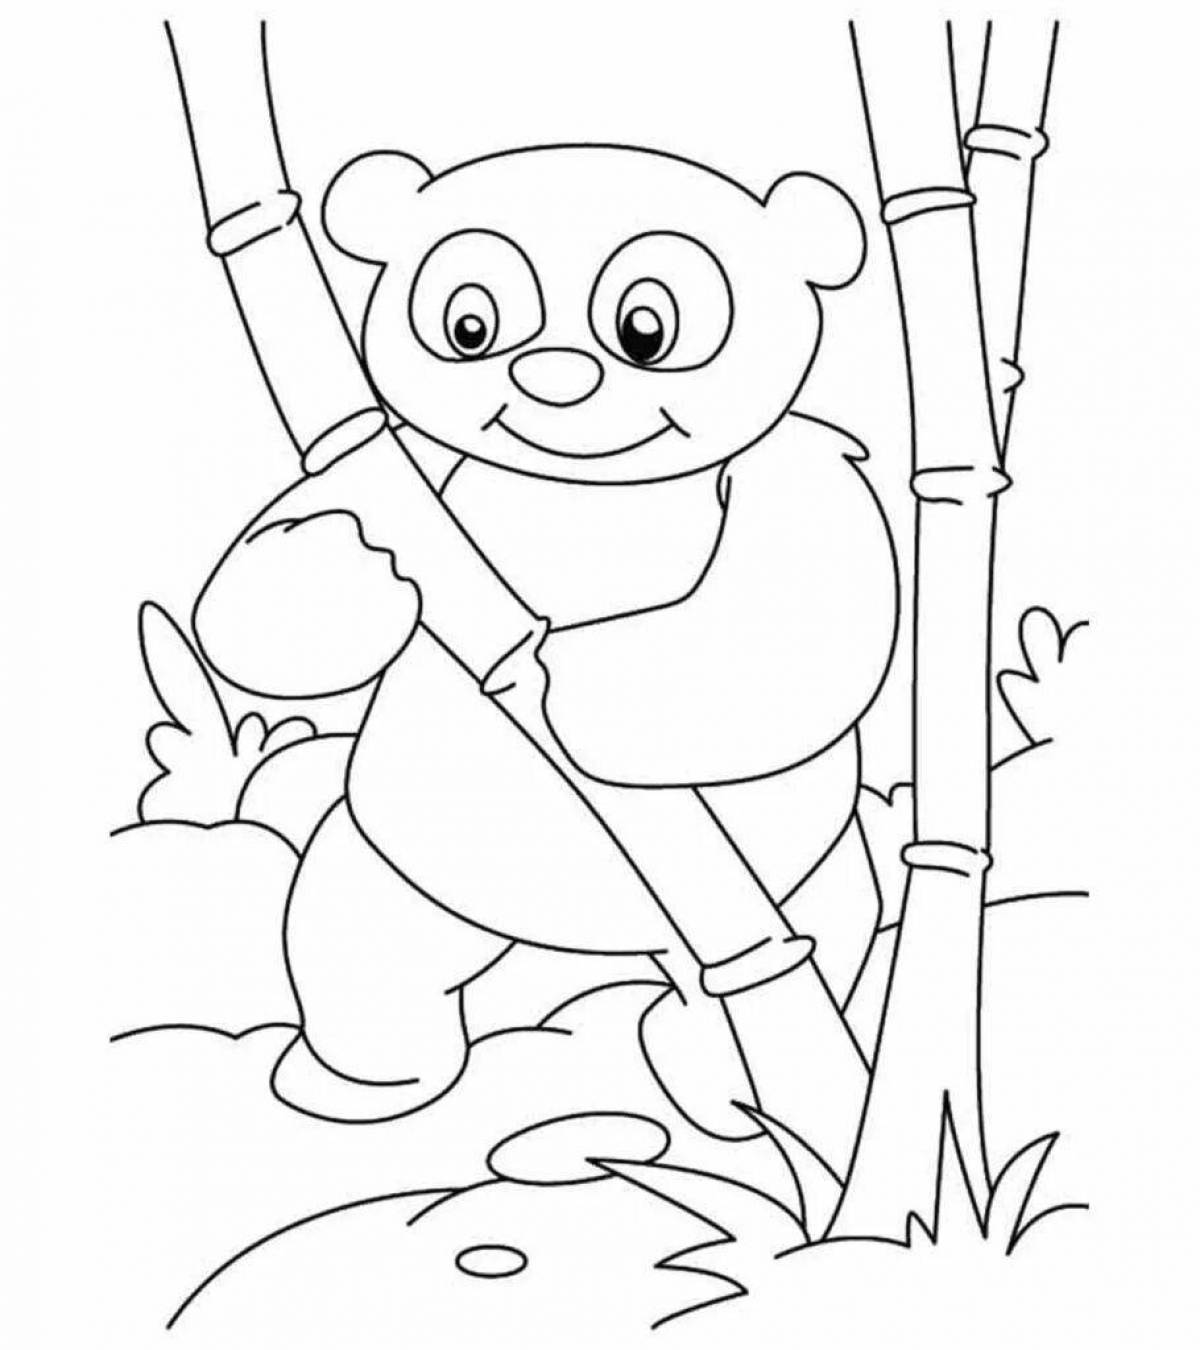 Coloring funny panda with bamboo